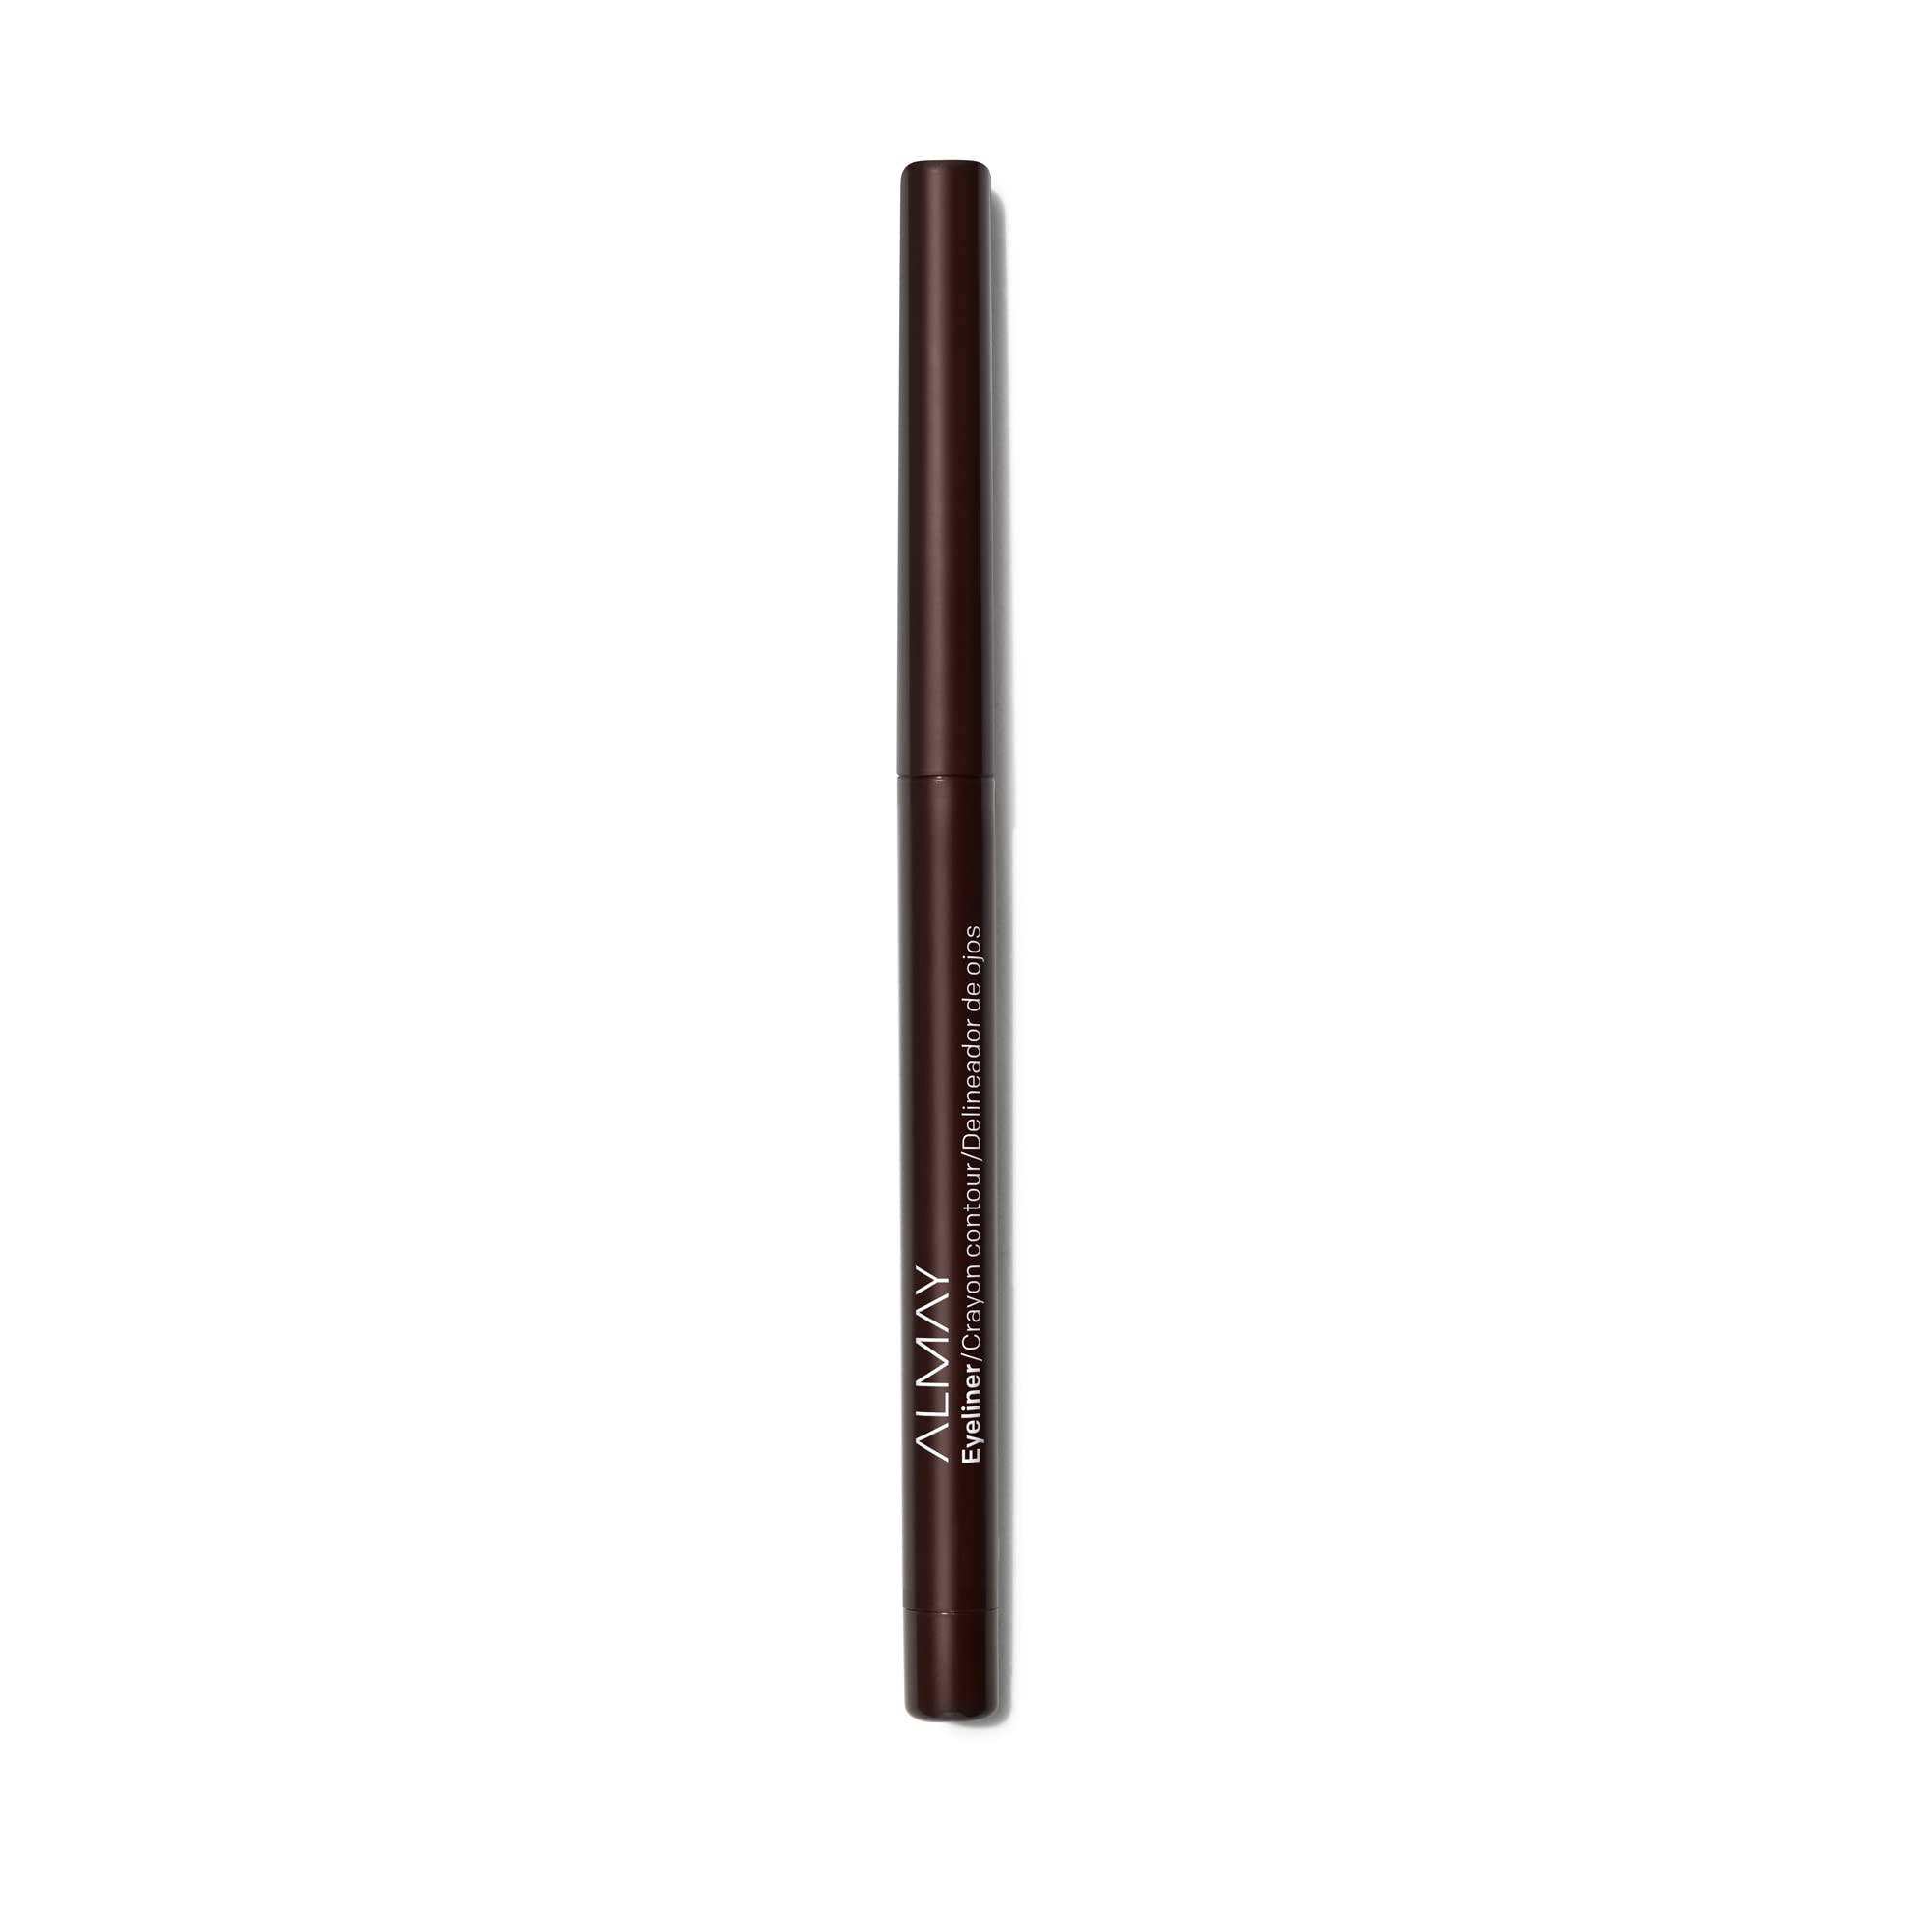 Almay Eyeliner Pencil, Hypoallergenic, Cruelty Free, Oil Free, unscented, Ophthalmologist Tested, Long Wearing and Water Resistant, with Built in Sharpener, 209 Black Raisin, 0.01 oz